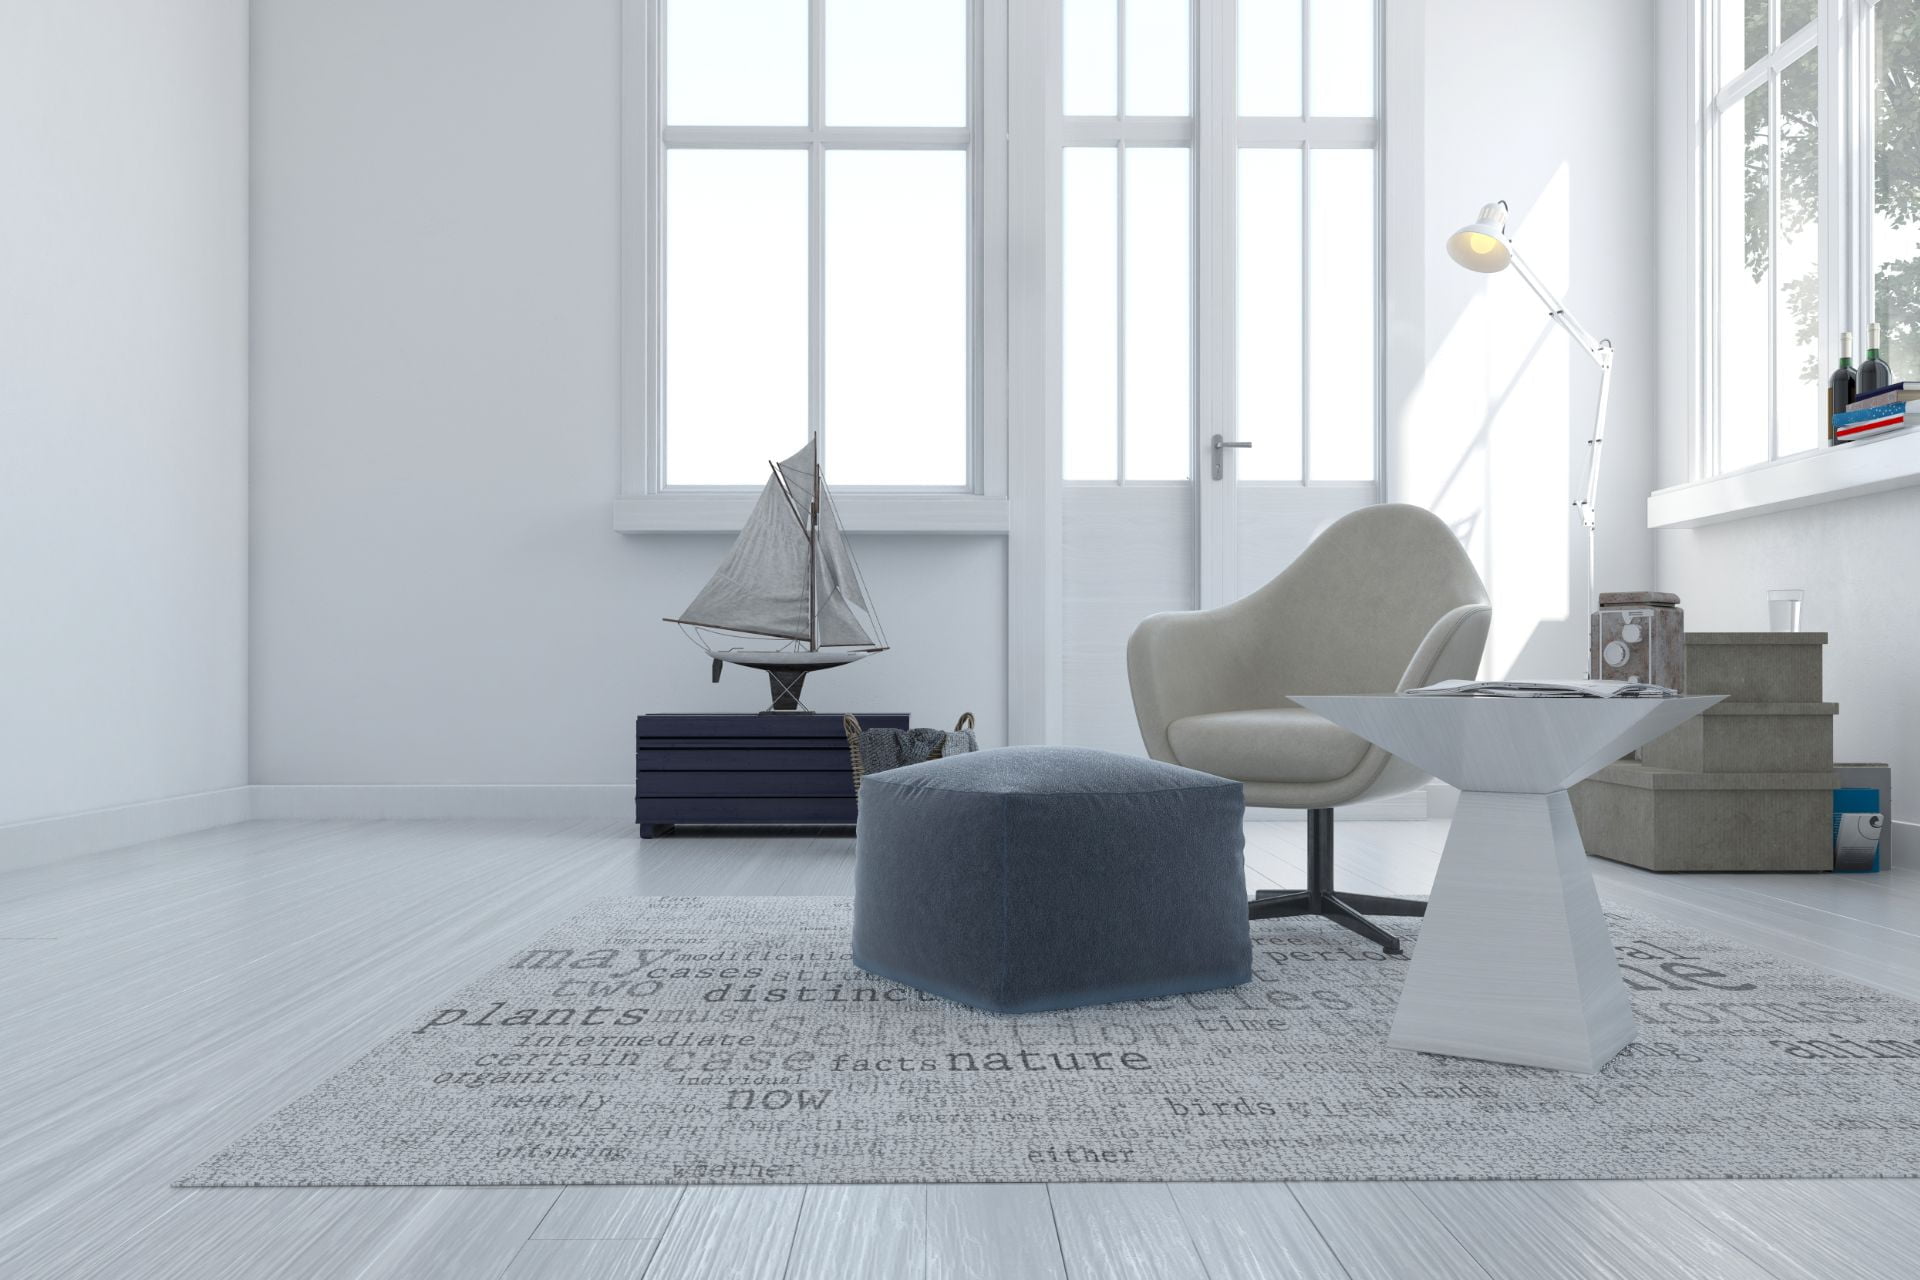 Enhancing spaces with an exquisite area rug at Danmark Flooring